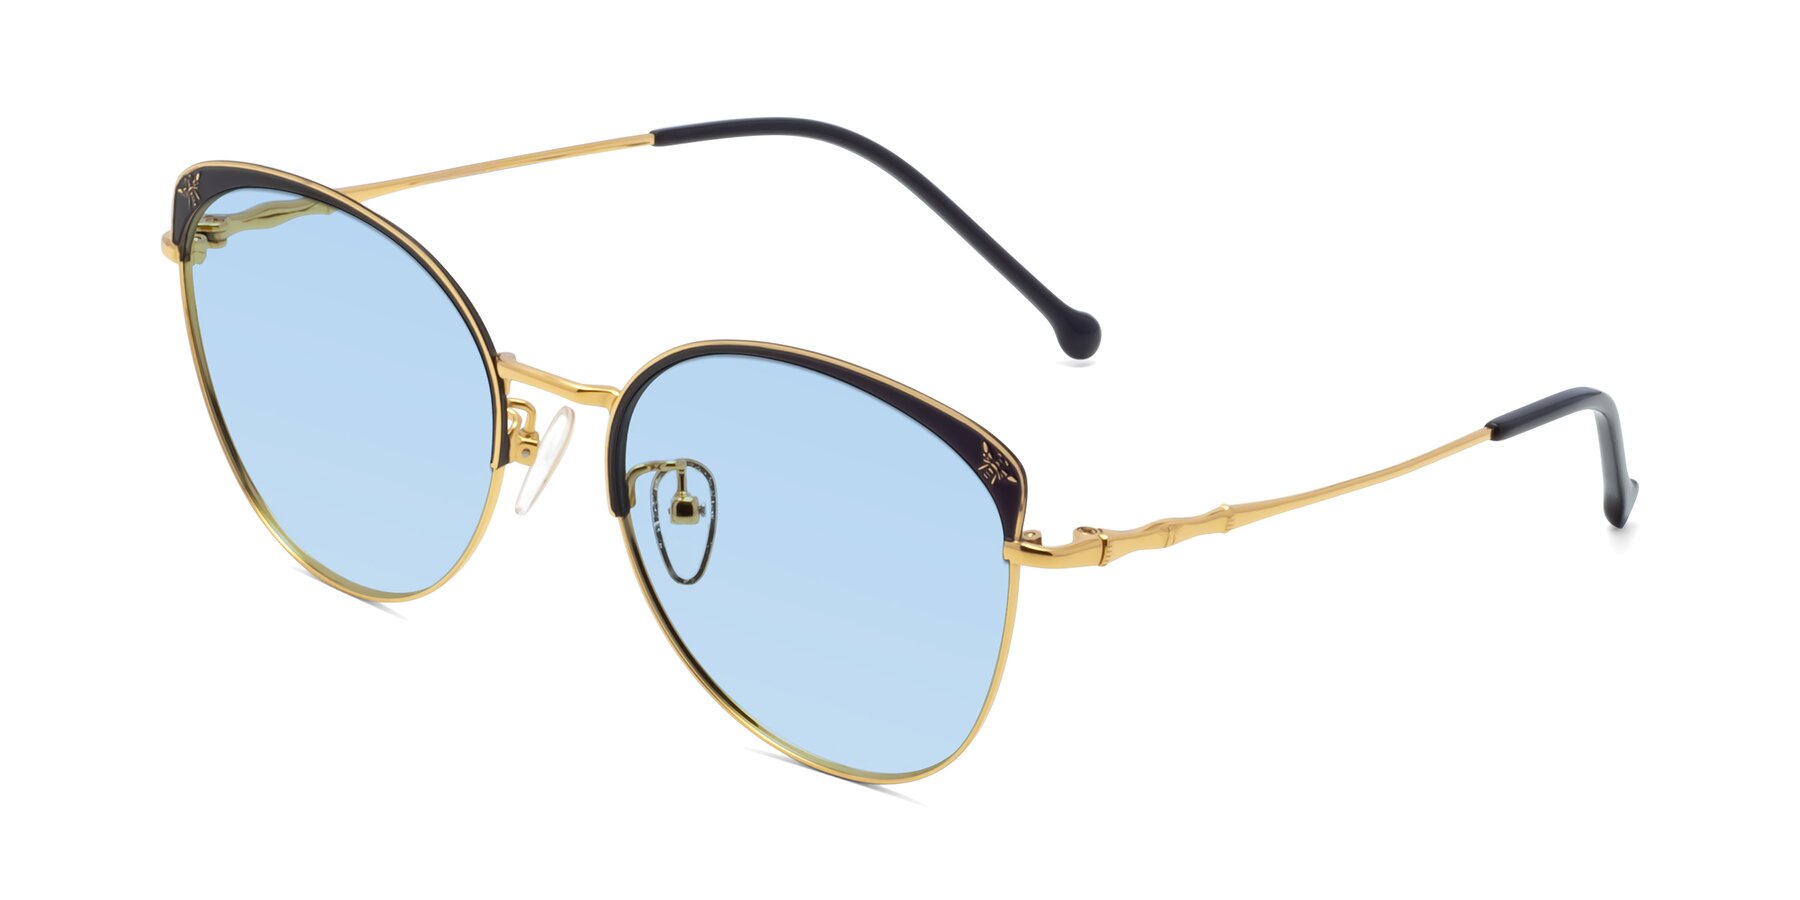 Angle of 18019 in Black-Gold with Light Blue Tinted Lenses